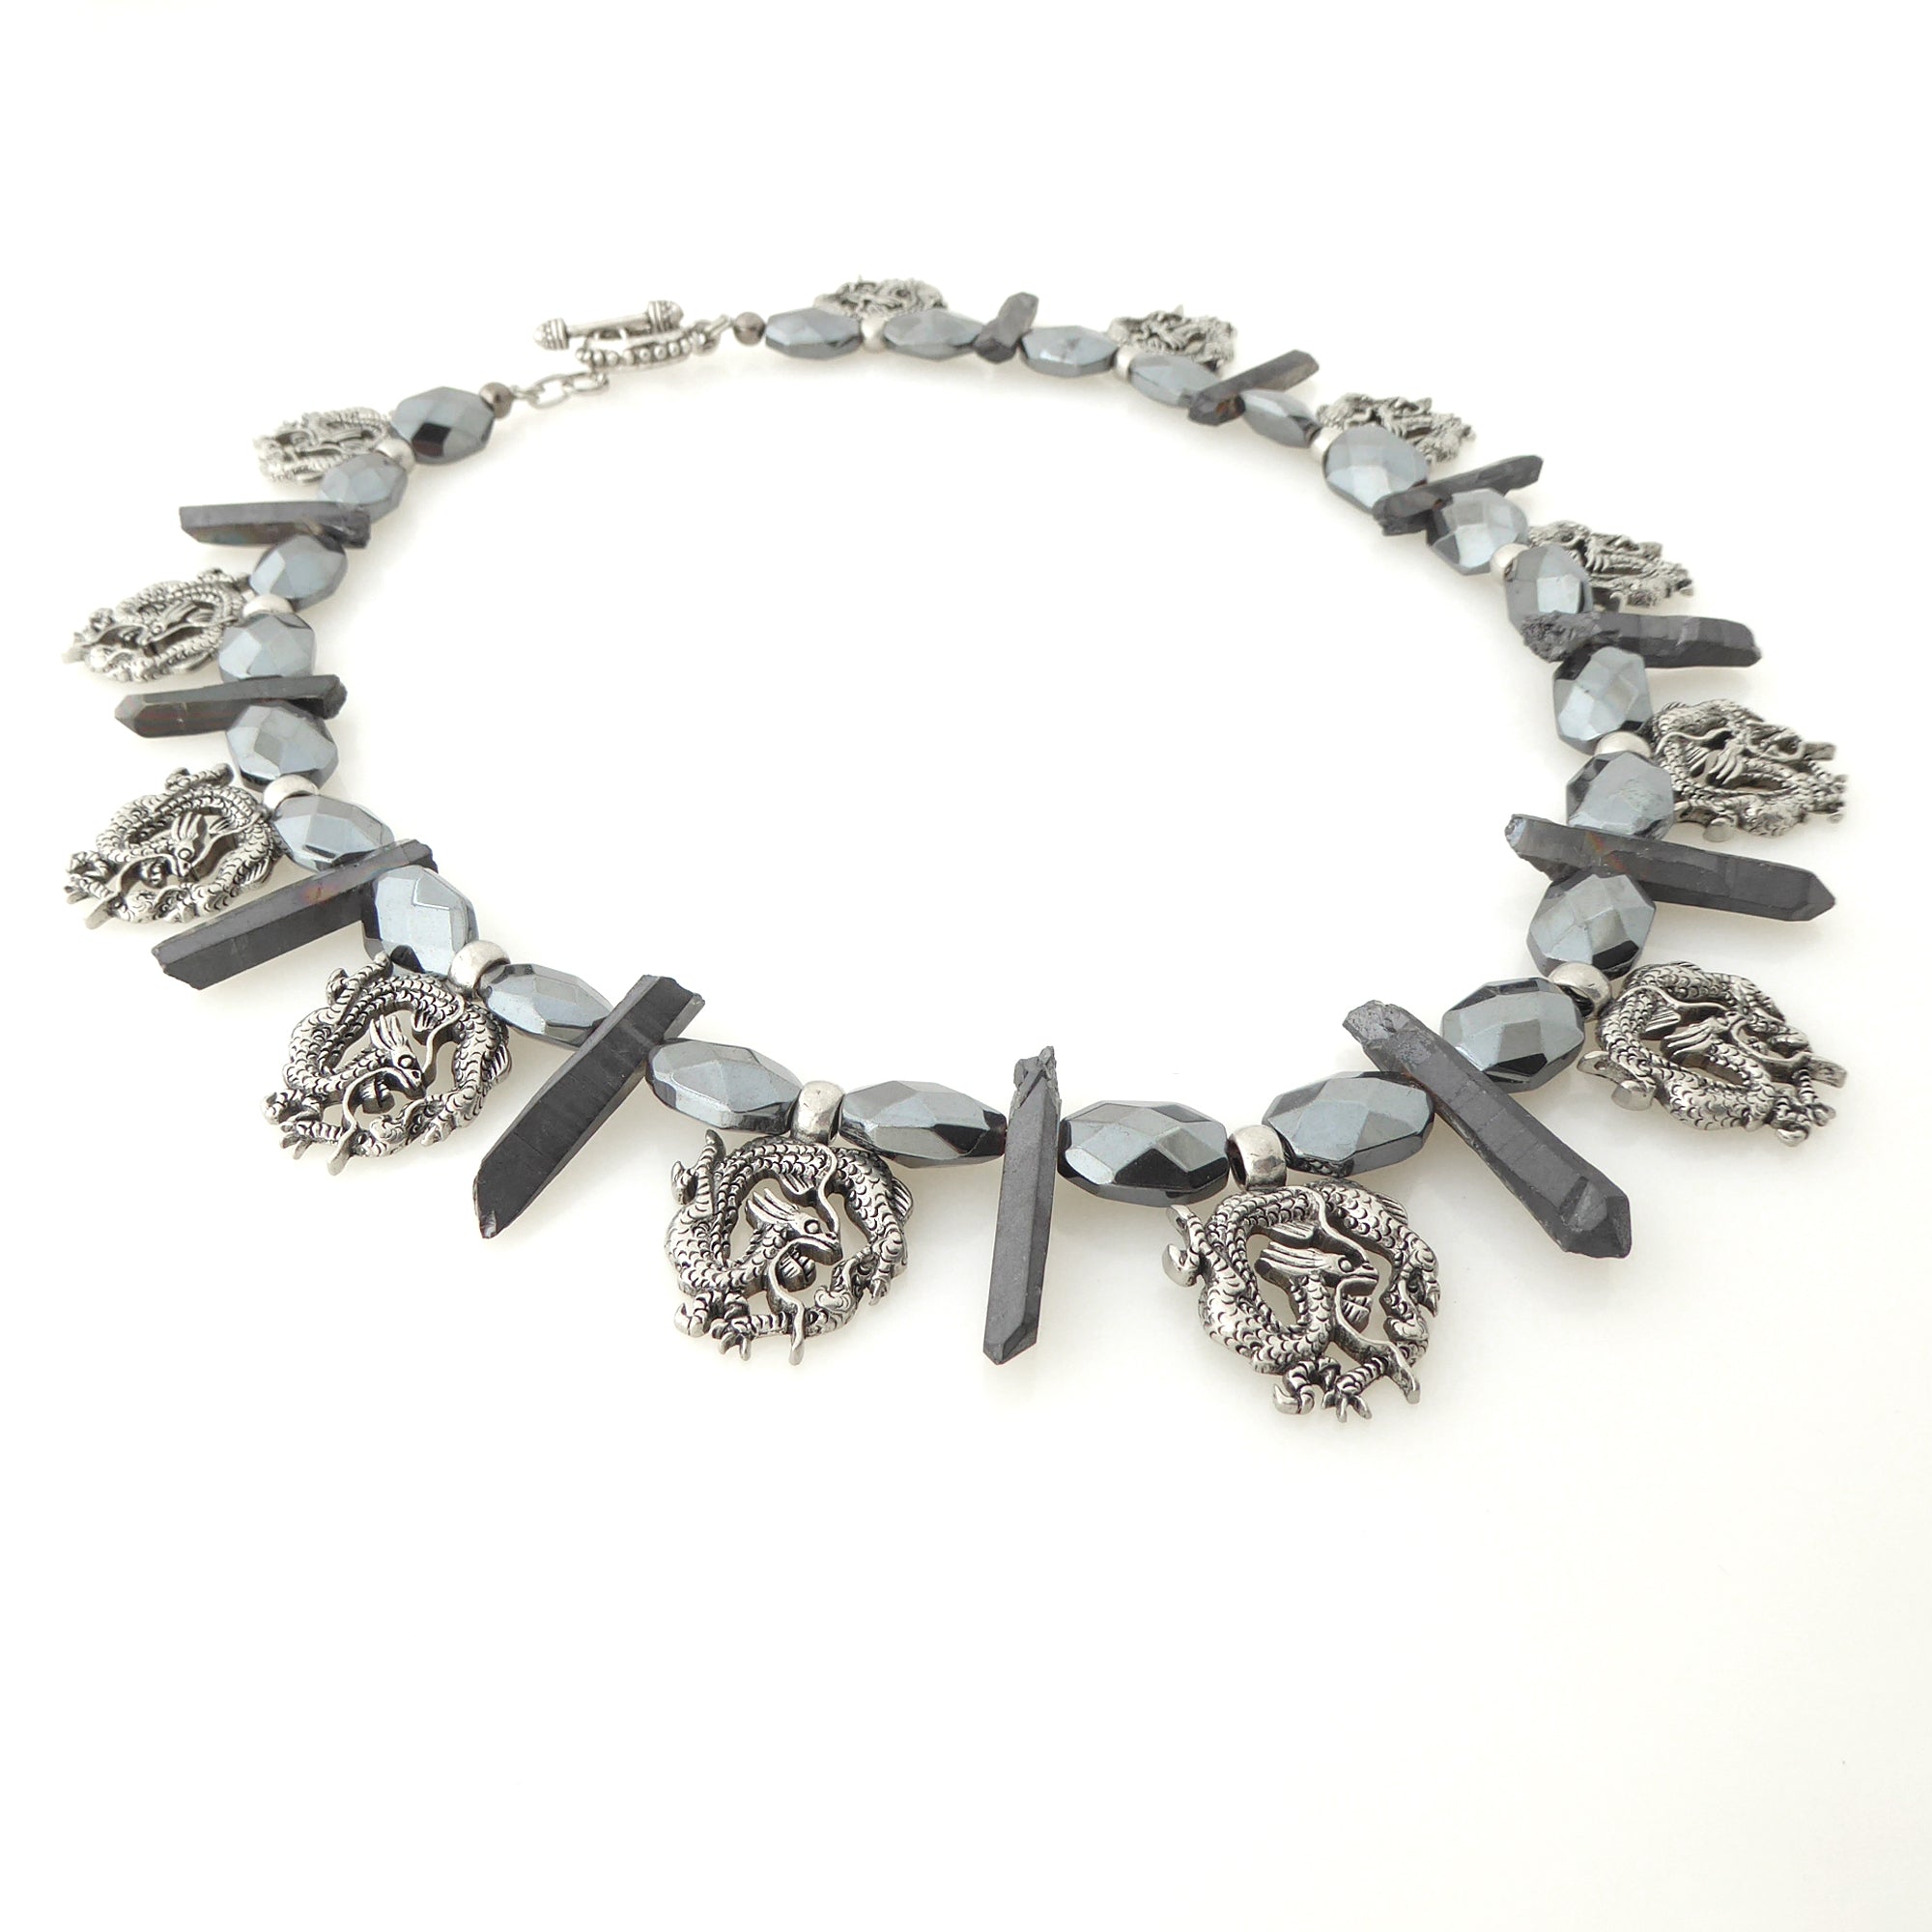 Antique silver dragon and hematite necklace by Jenny Dayco 2